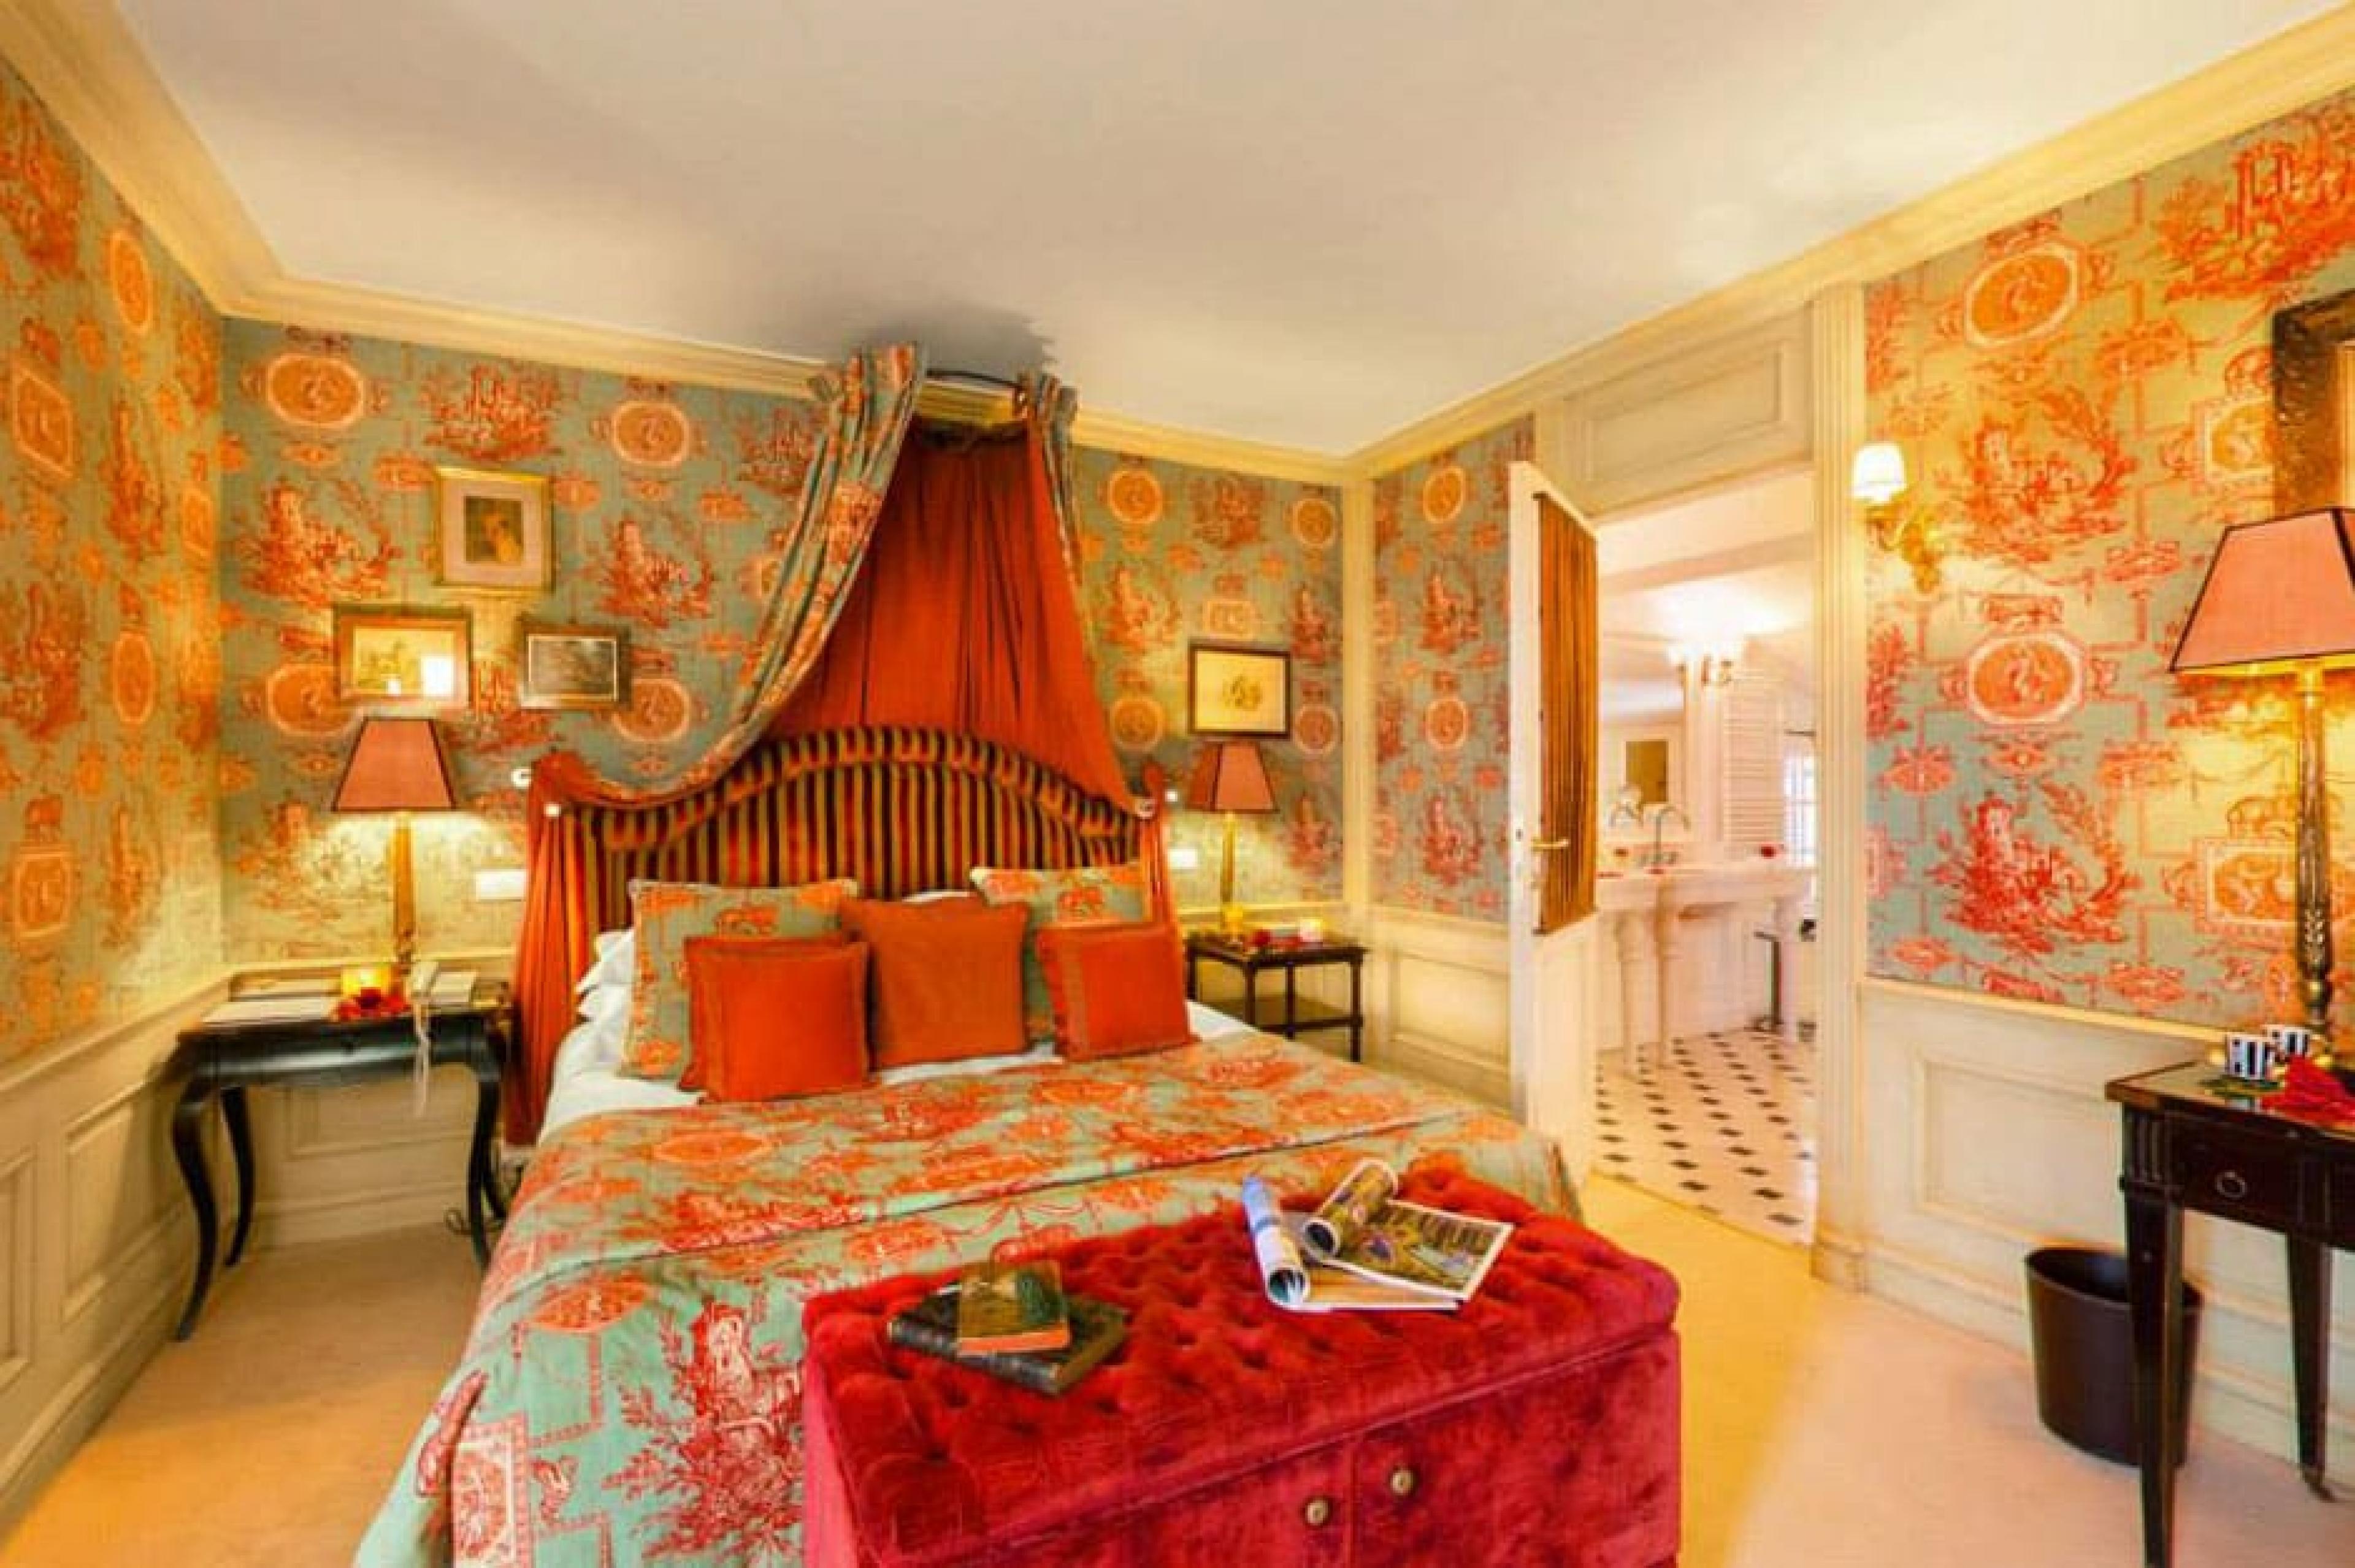 Bedroom at Le Saint Paul, French Riviera, France